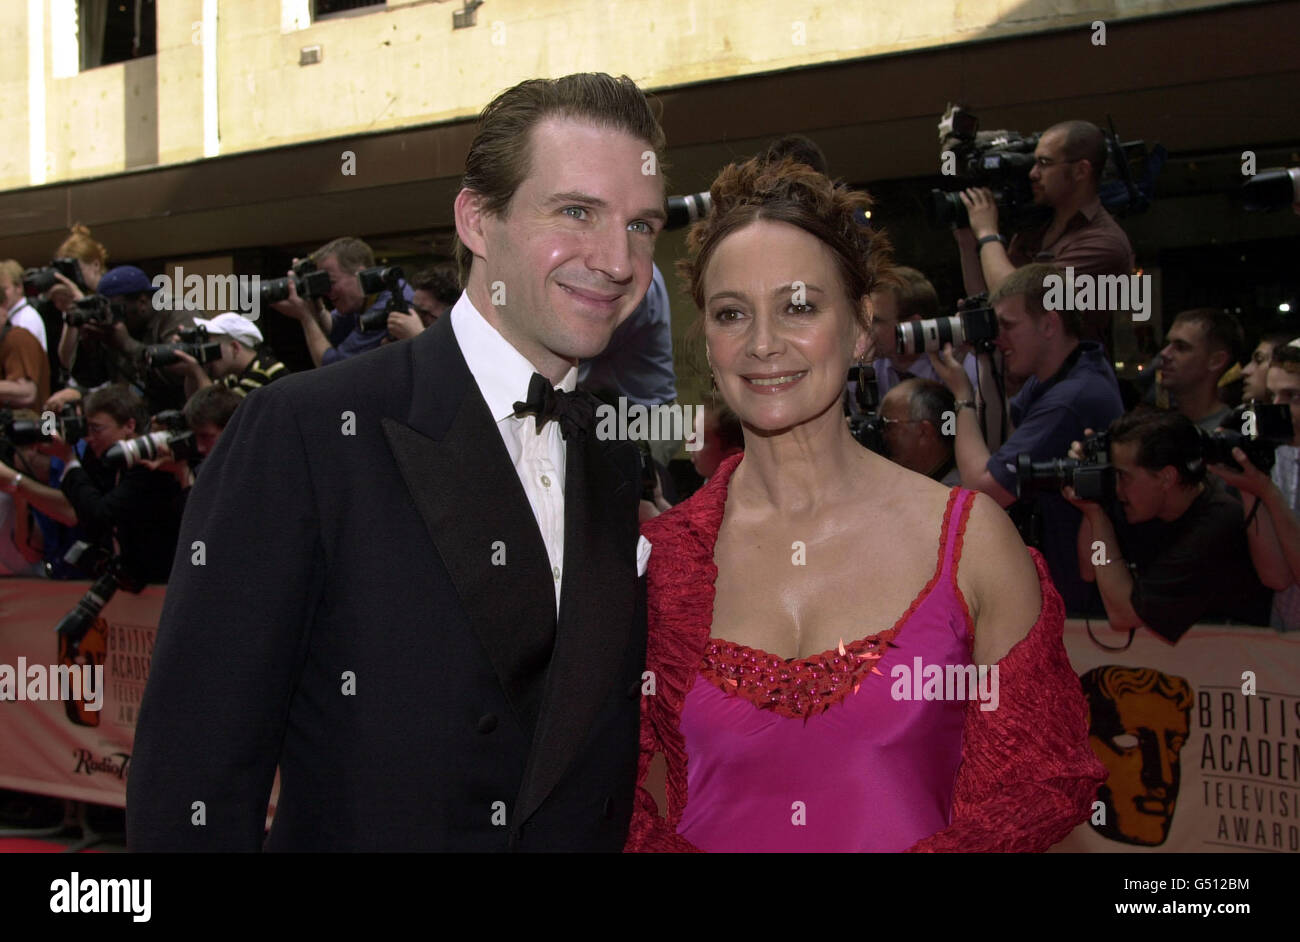 Actor Ralph Fiennes and his partner, actress Francesca Annis, arrive at the British Academy TV Awards (BAFTA's) in London. Stock Photo